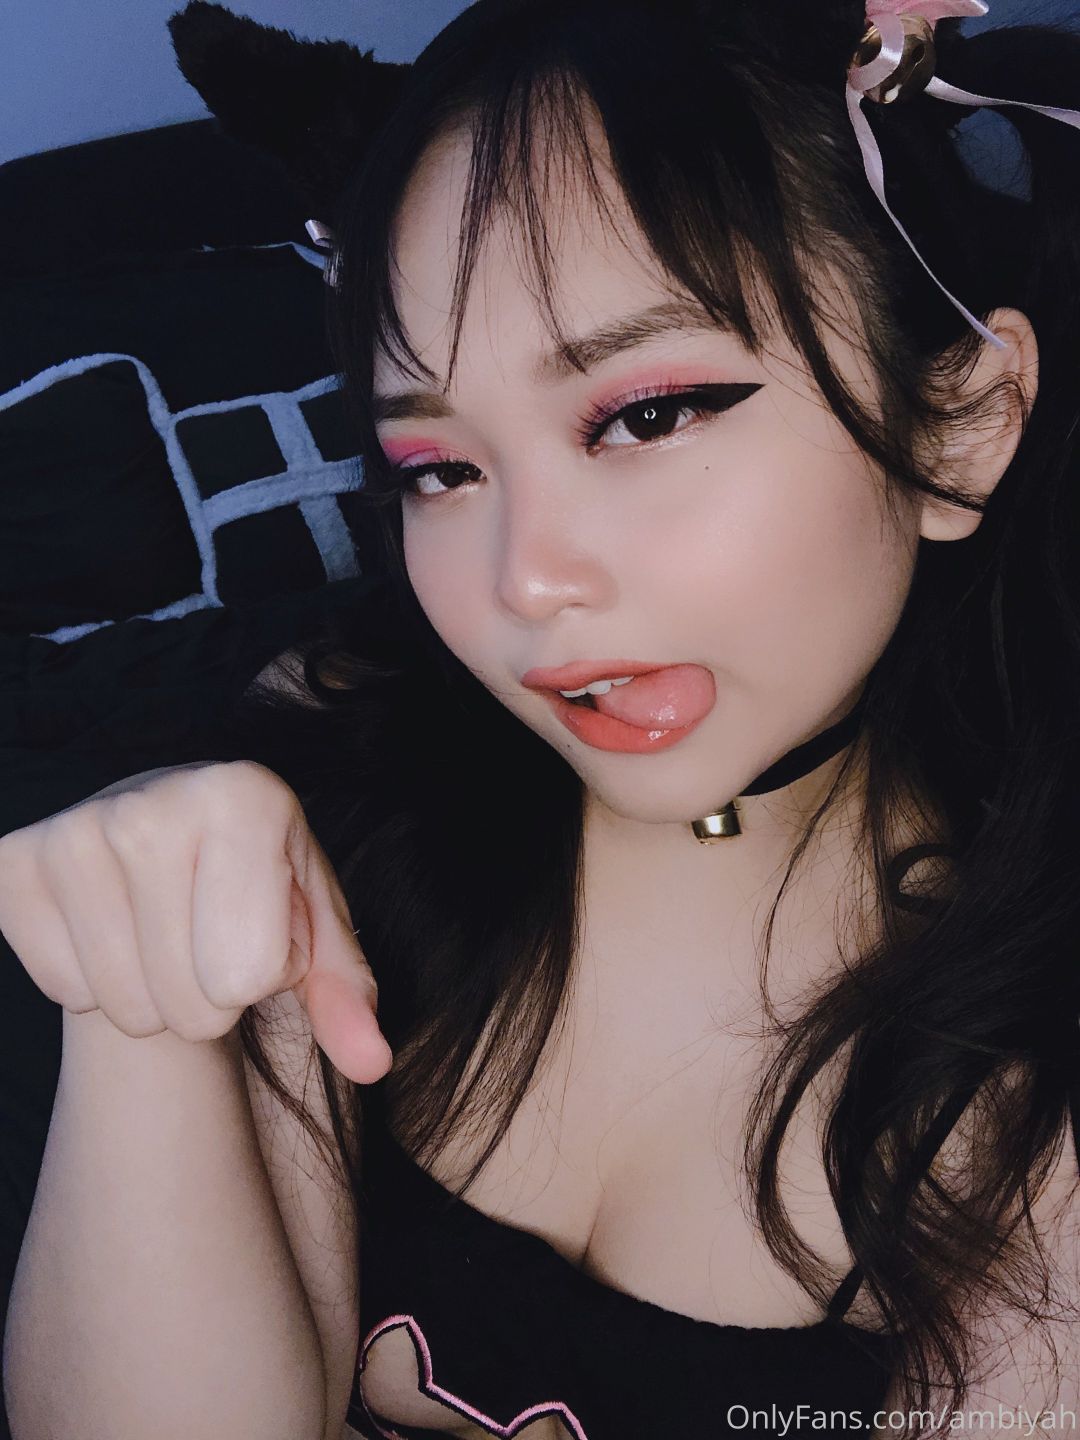 AsianOnlyfans 72 074 817 20220225